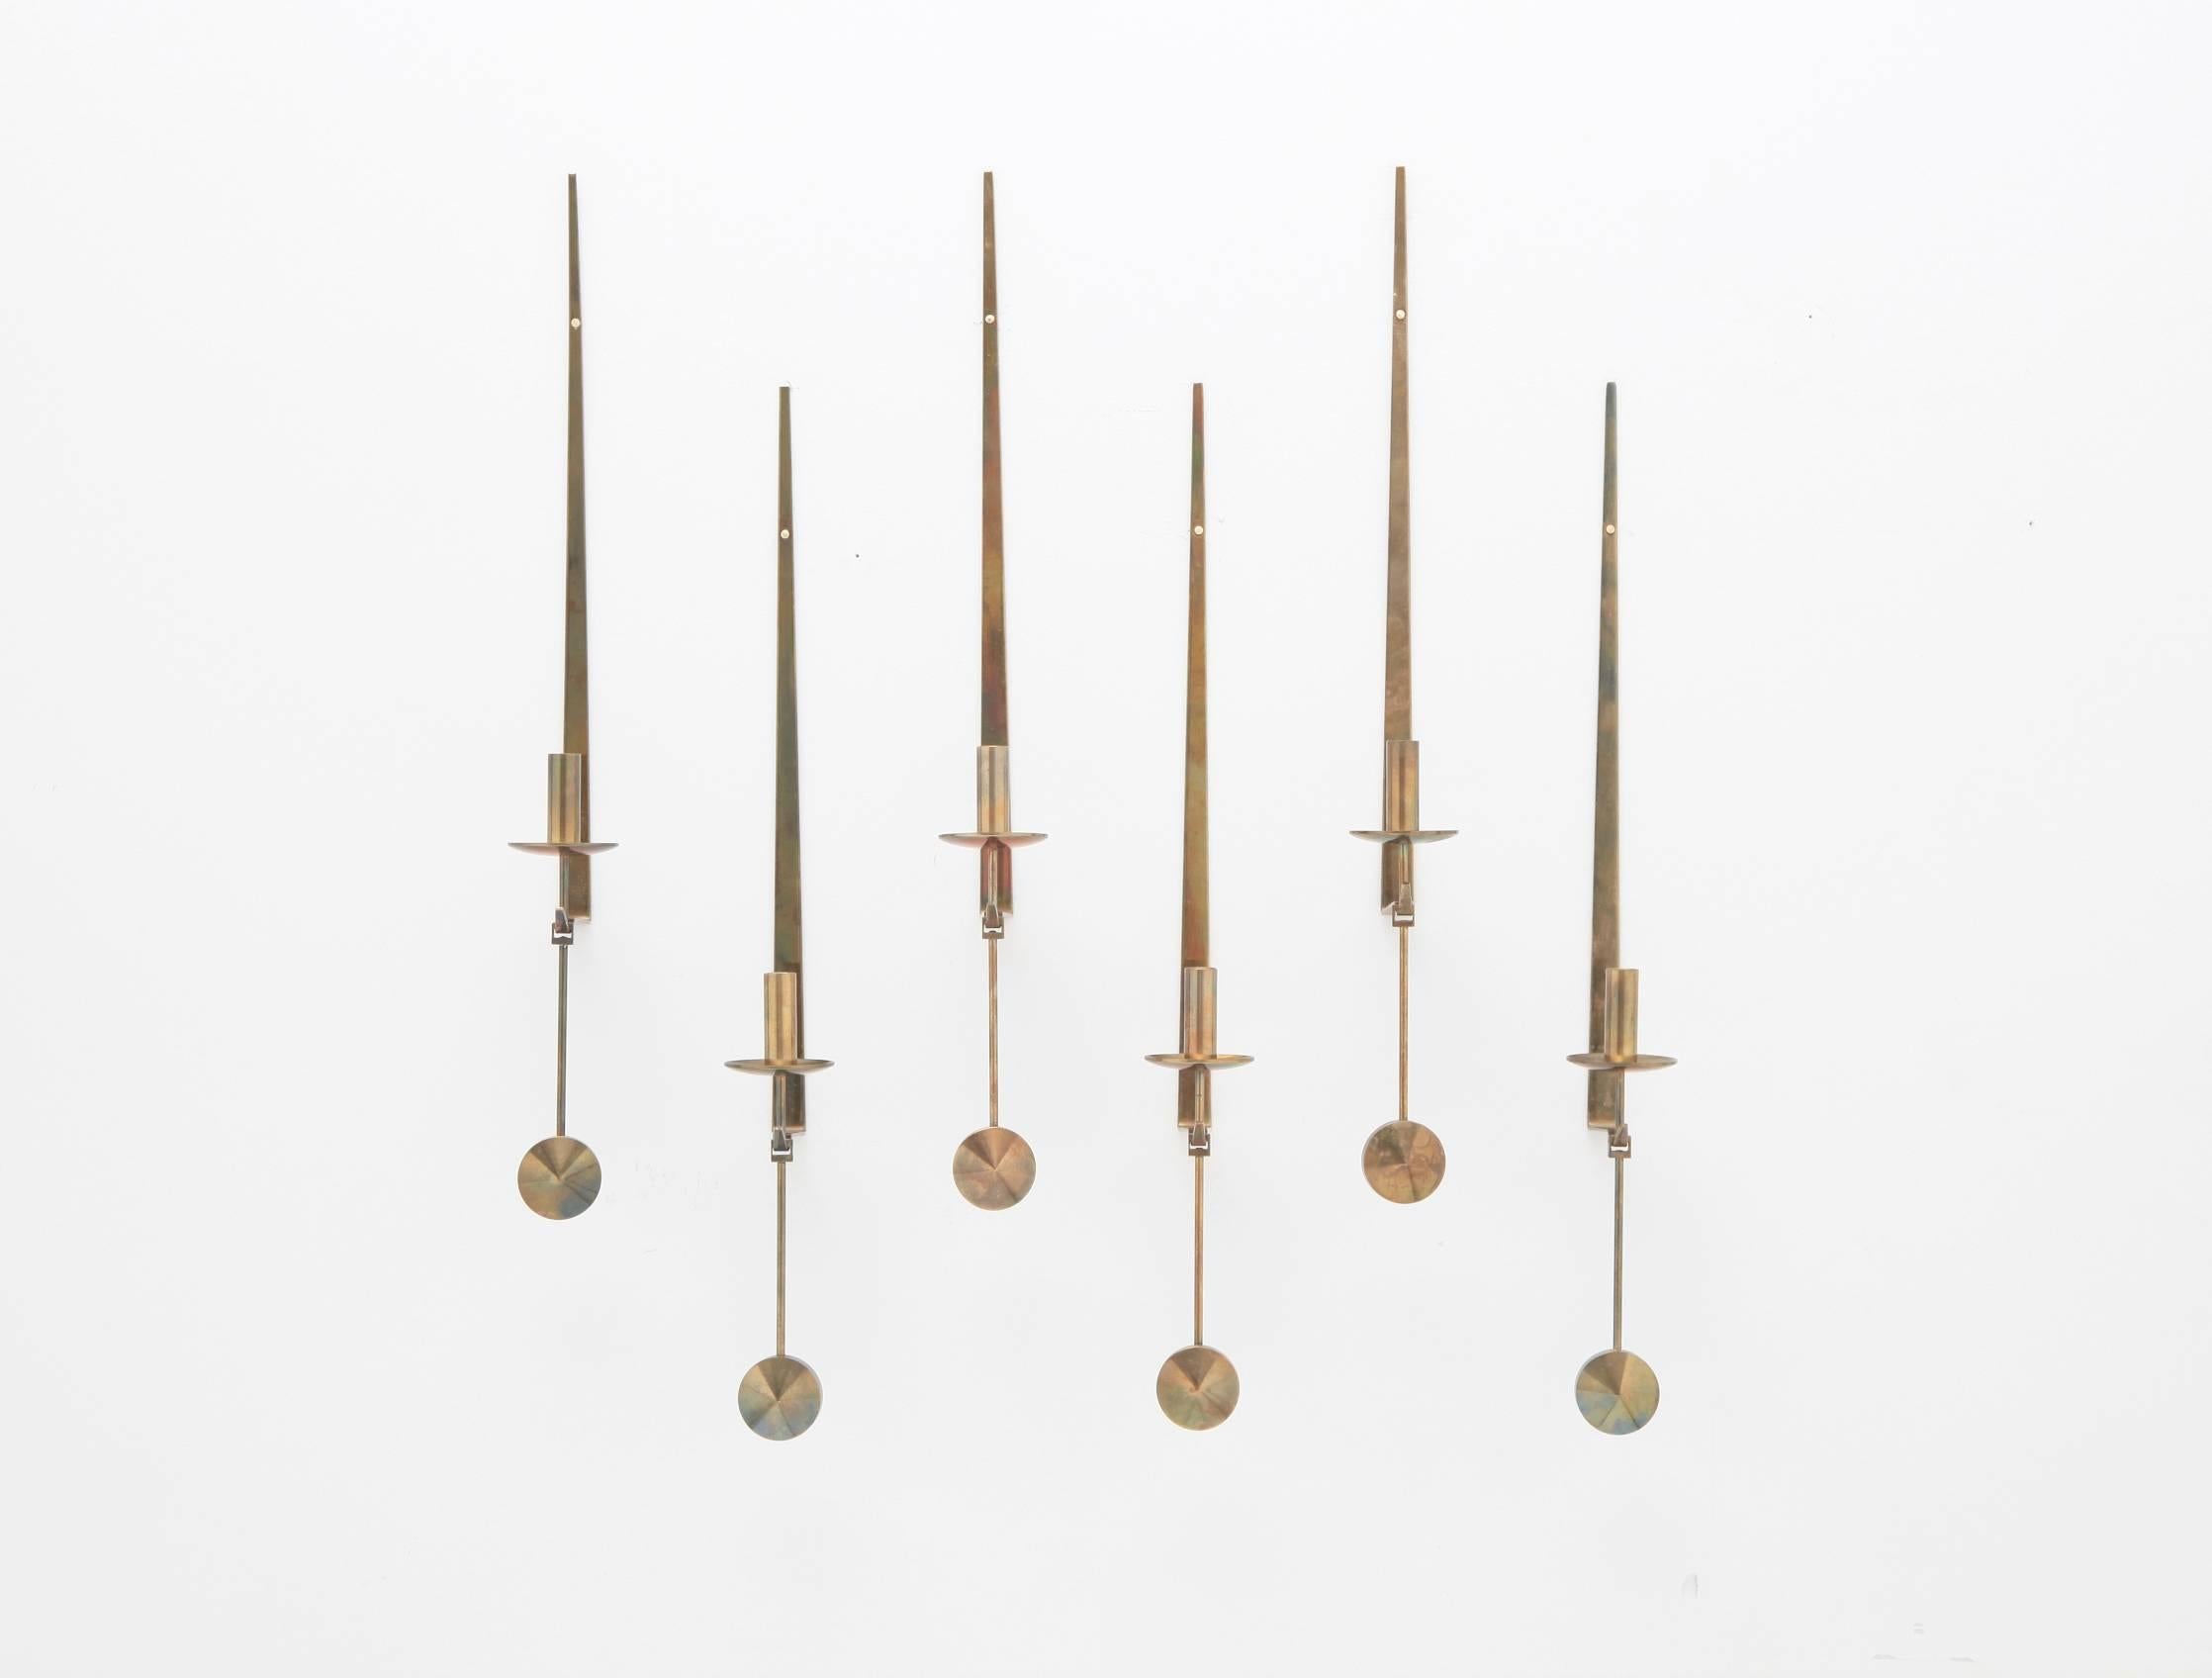 Pierre Forsell designed brass pendel wall appliques, collection of six. Rarer version with bobeche. Made by Skultuna, Sweden, circa 1965. In beautiful original patinated condition. Stamped with makers mark. Priced individually - sold as a set or as